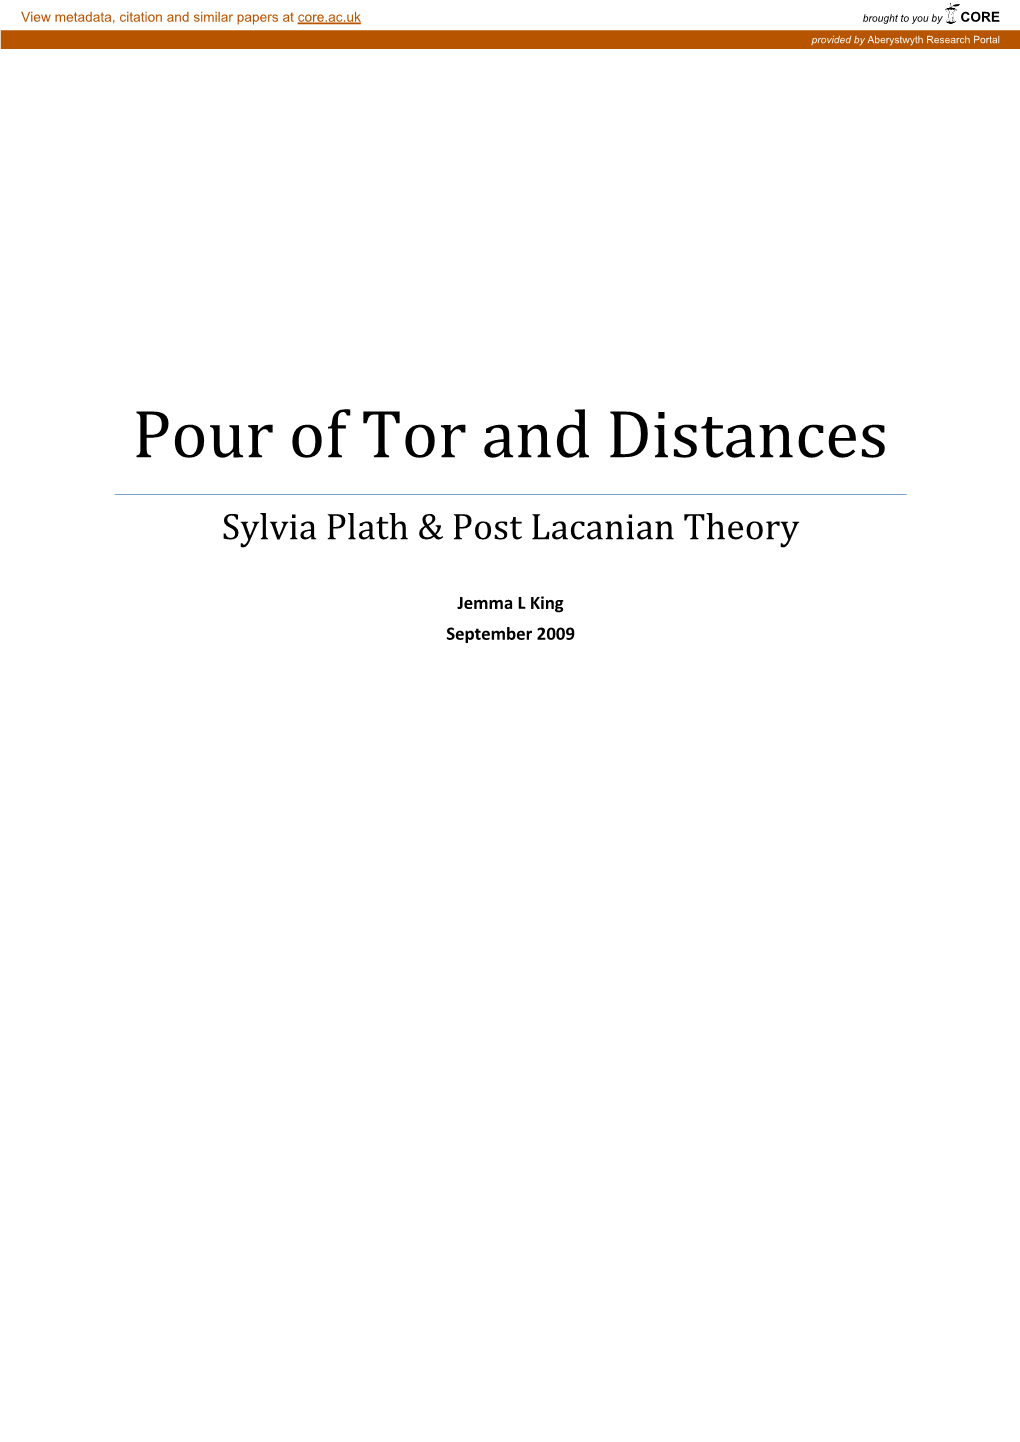 Pour of Tor and Distances Sylvia Plath & Post Lacanian Theory